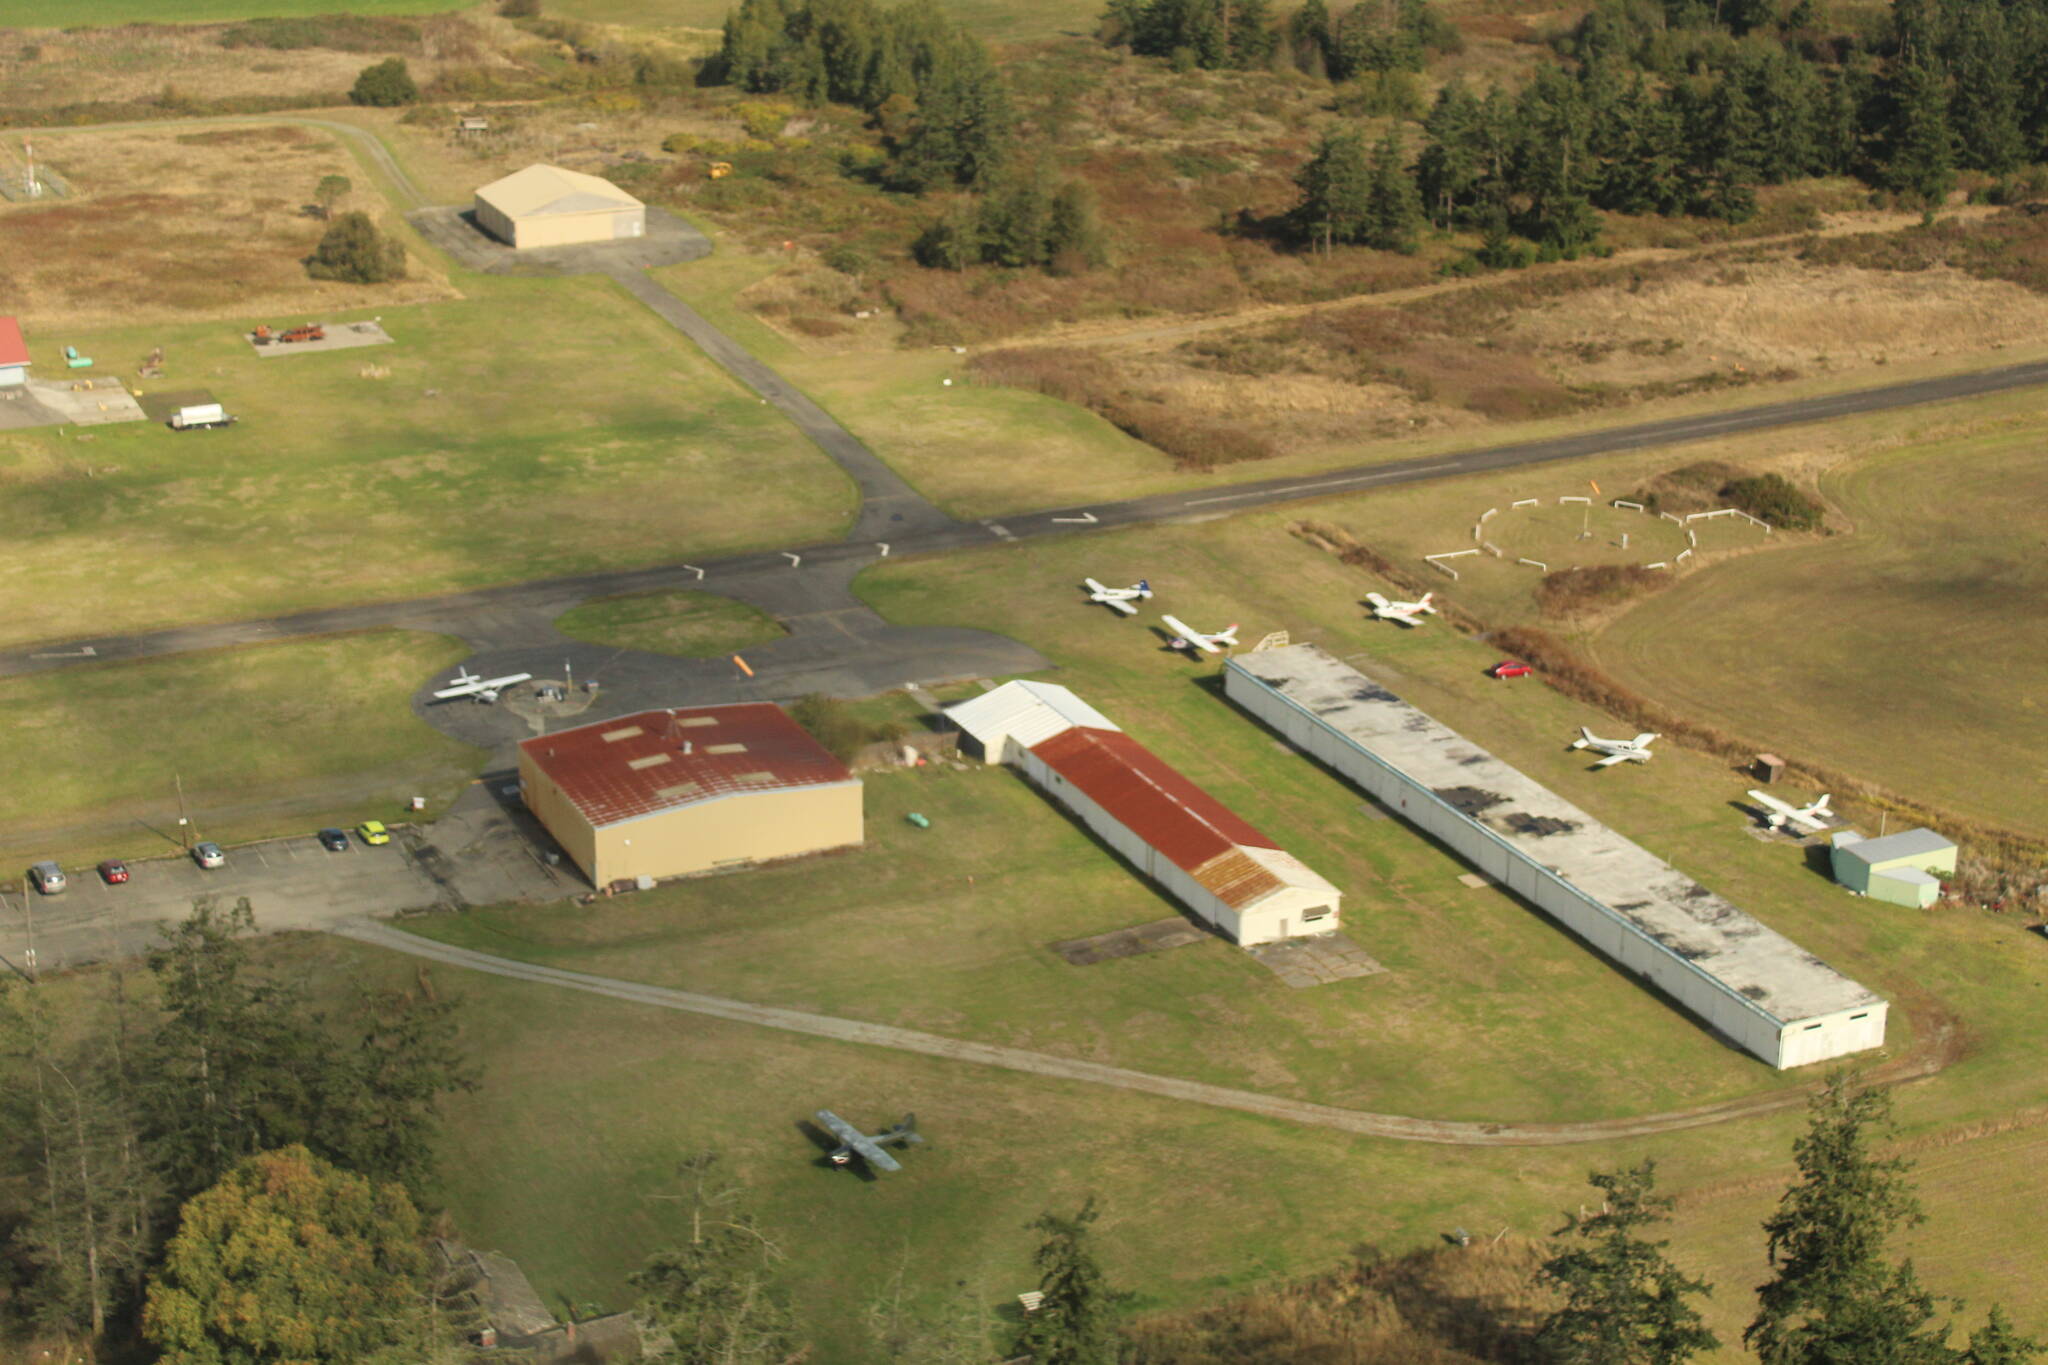 File photos by Karina Andrew/Whidbey News-Times
County commissioners recently voted to negotiate for the purchase of the A. J. Eisenberg Airport.